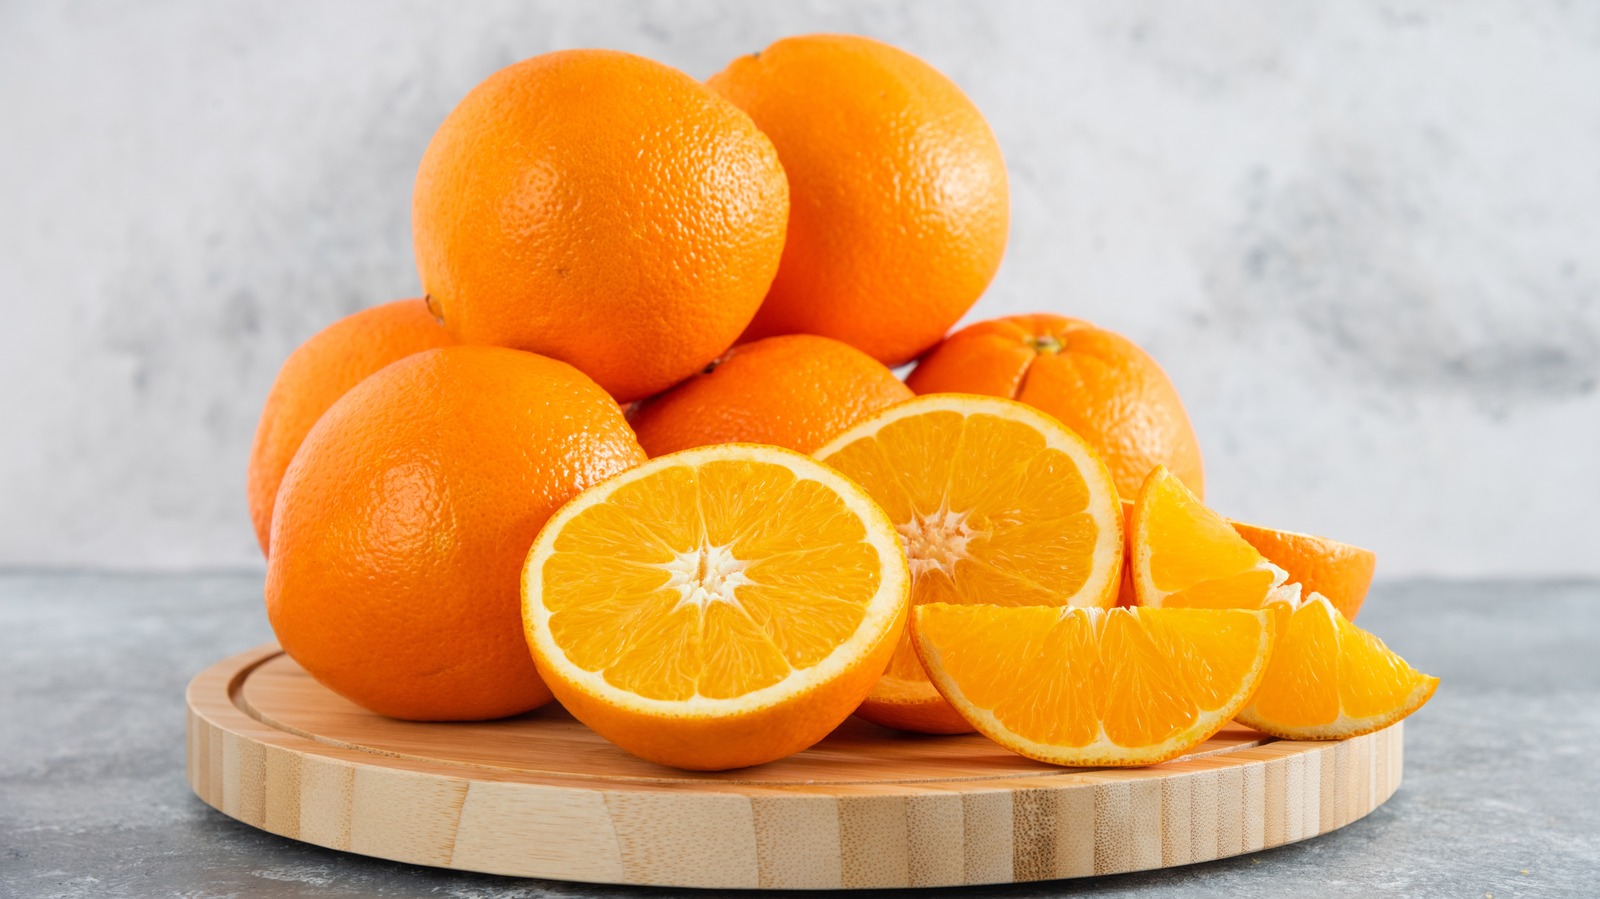 https://www.tastingtable.com/img/gallery/are-oranges-named-after-the-color/l-intro-1666984048.jpg